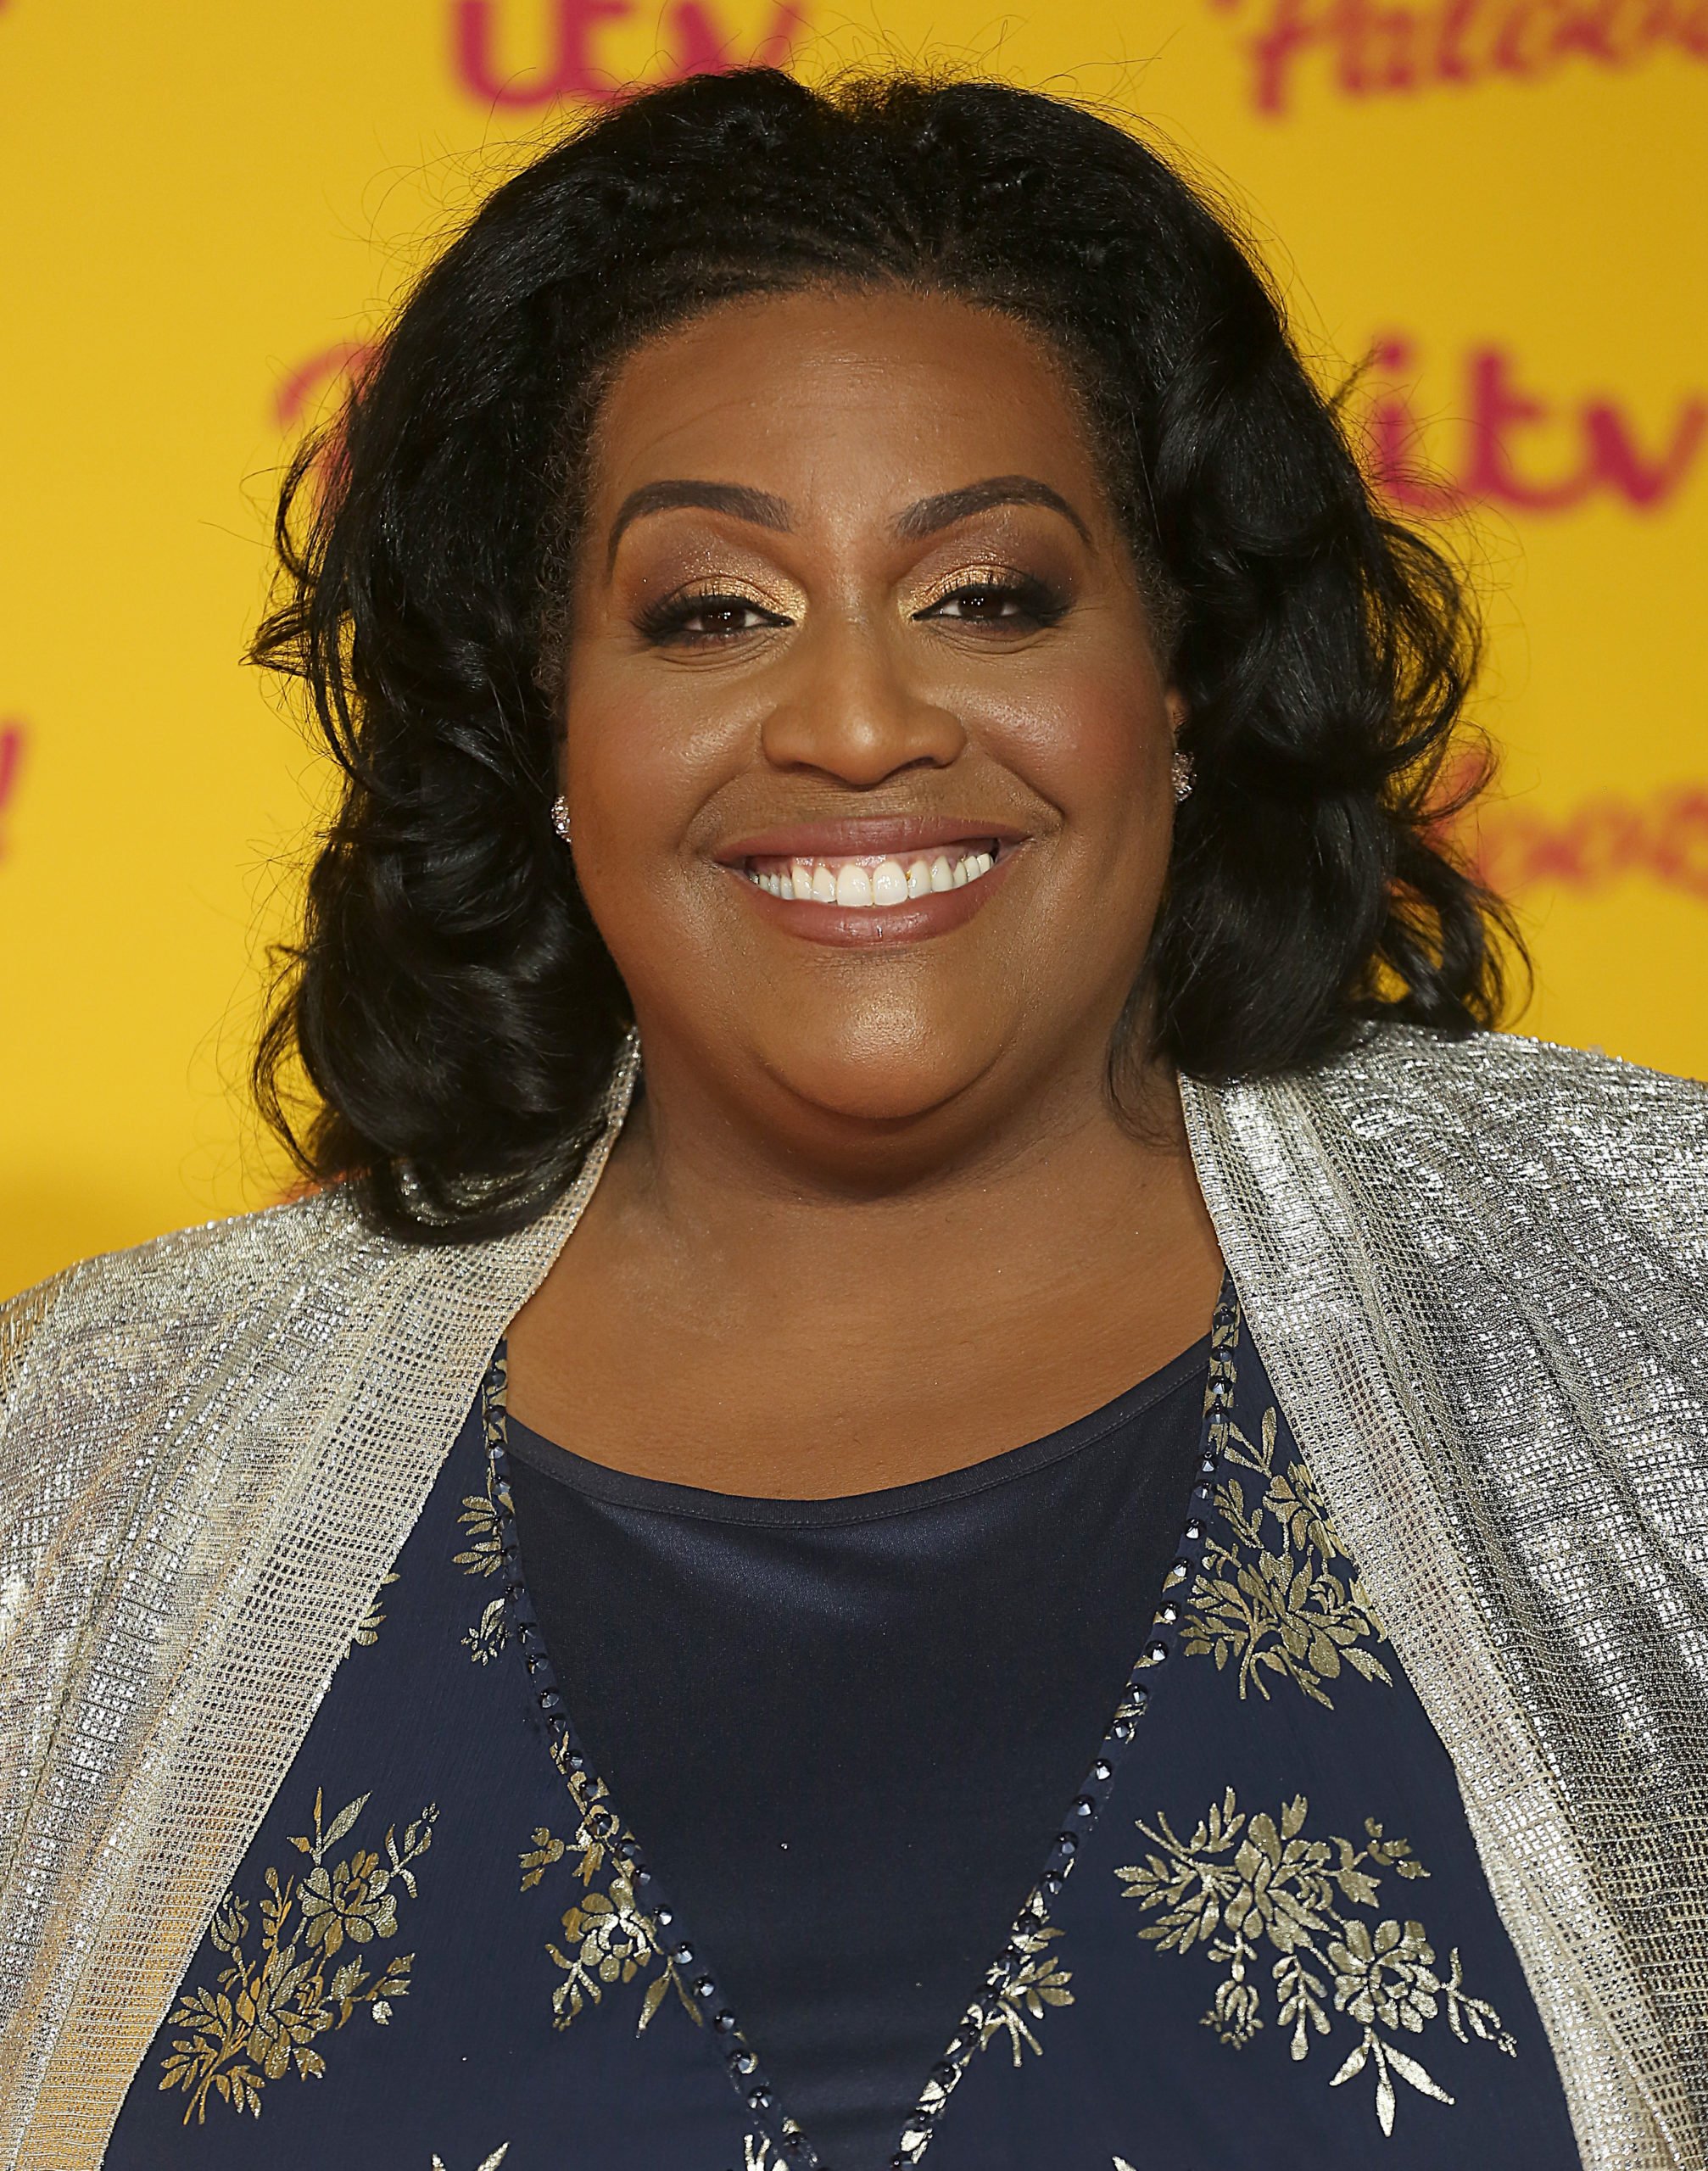 Alison Hammond's Partner Revealed: Get To Know The Man By Her Side